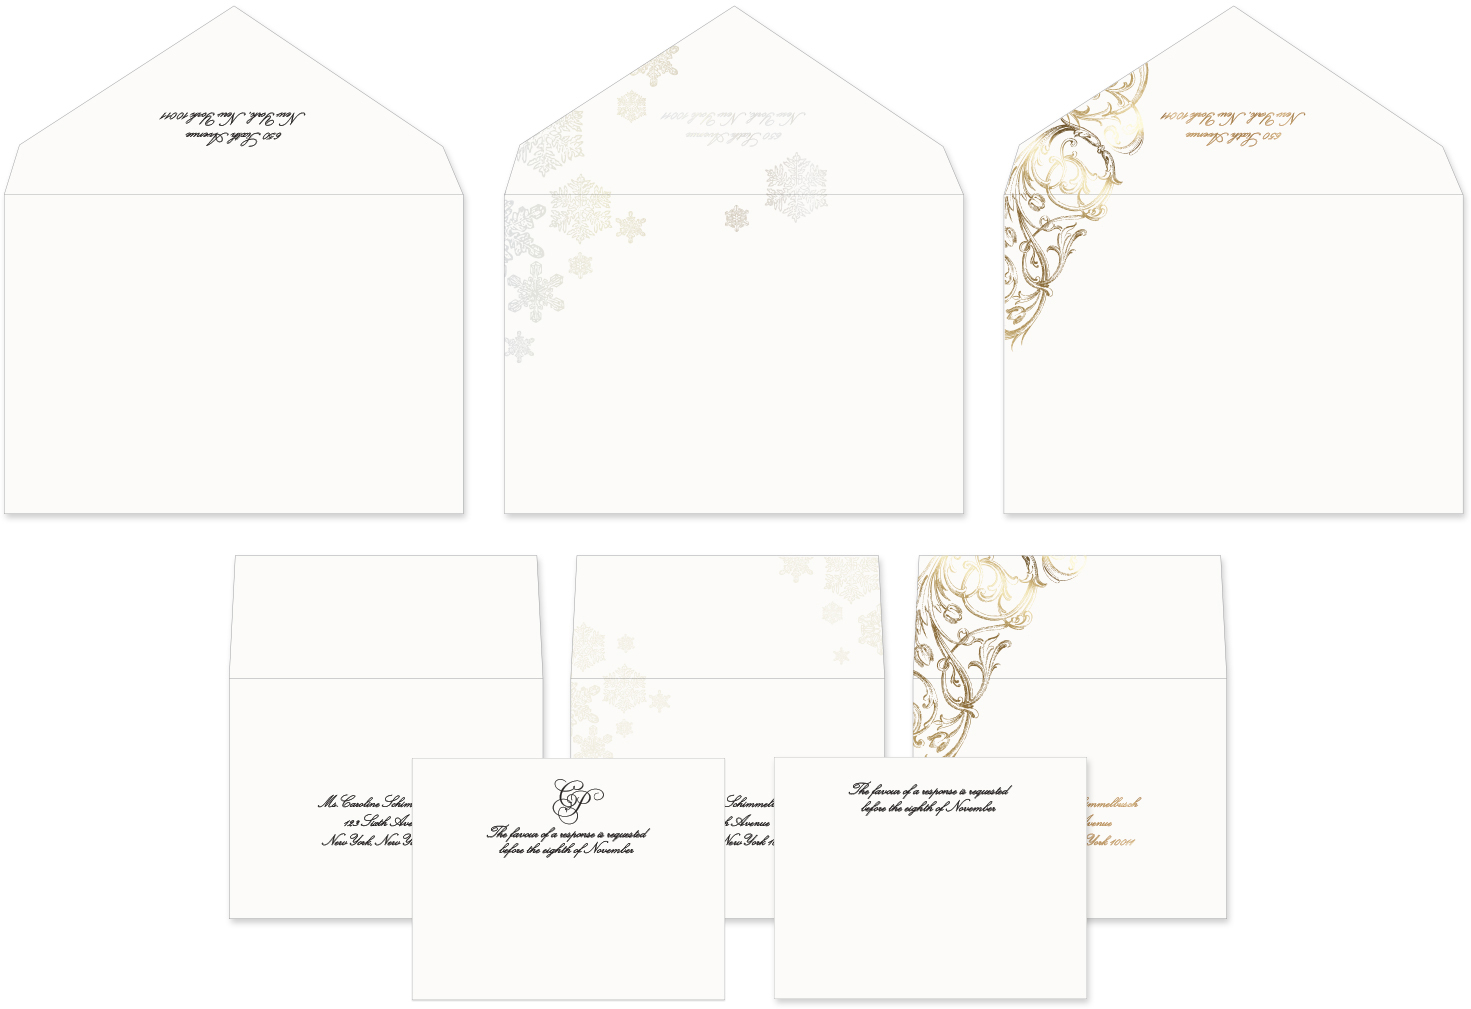 Matching ornate and winter inspired envelopes